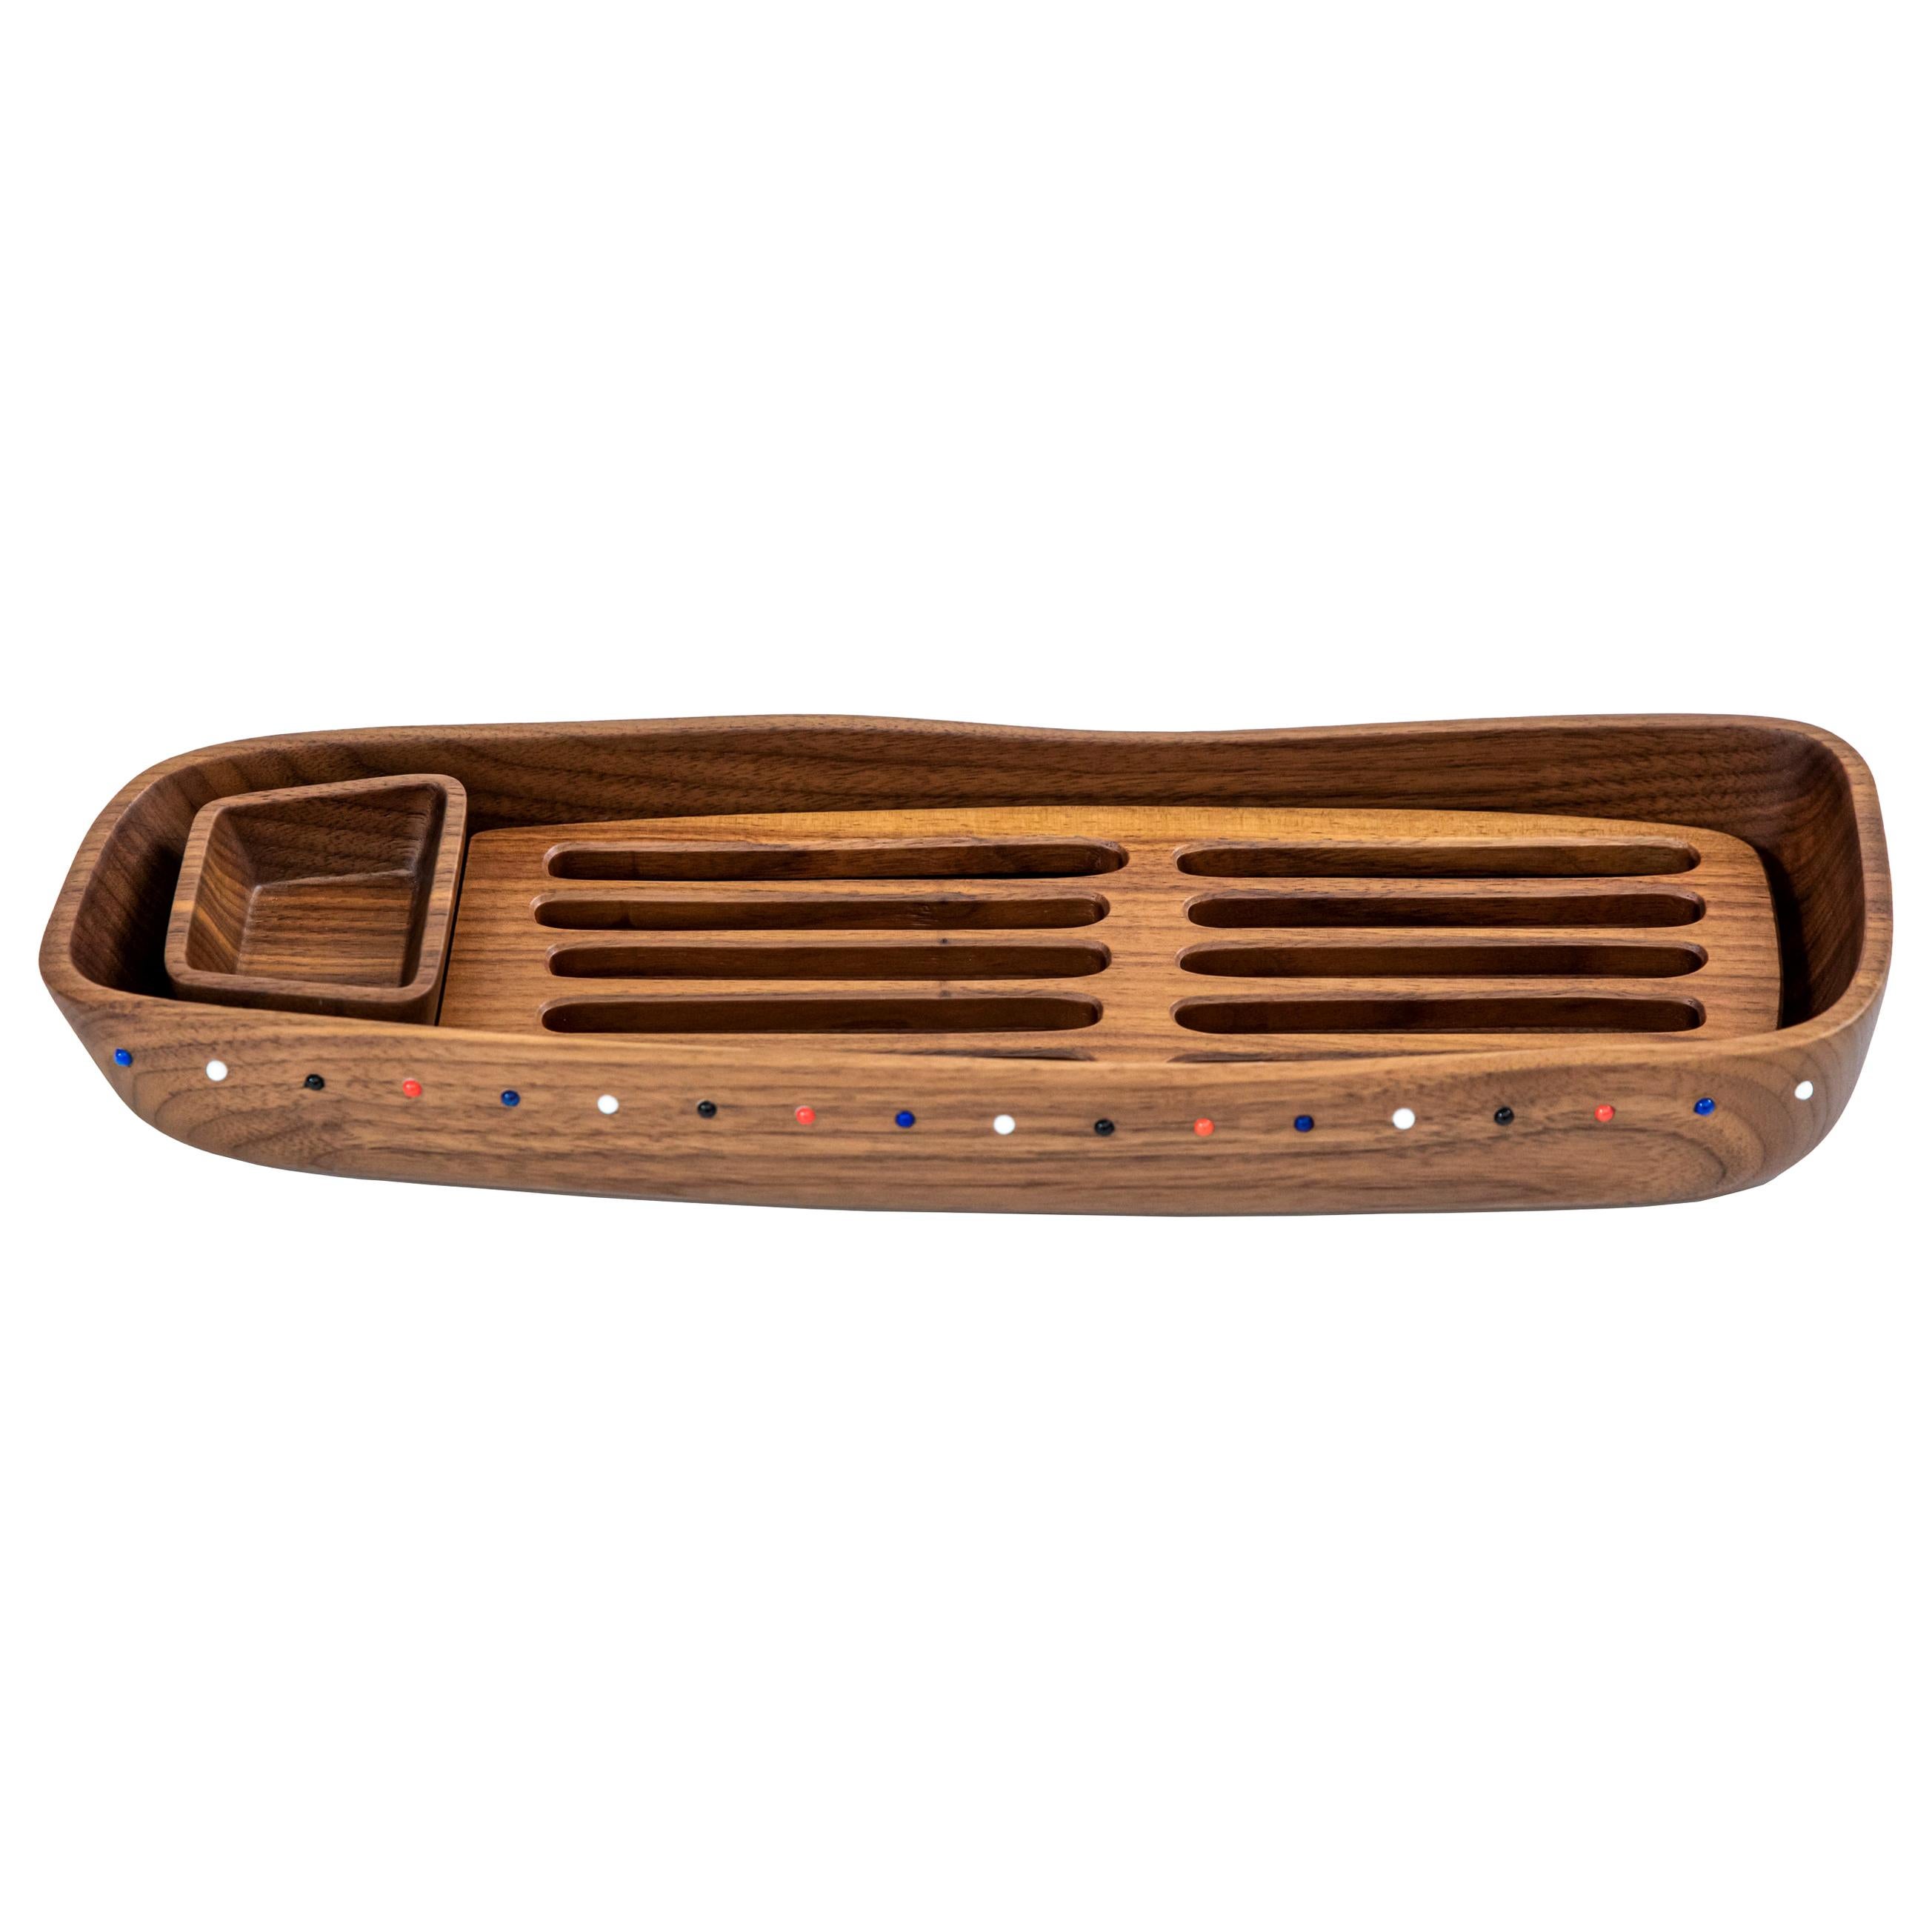 Appetizer and bread wooden serving tray from the SoShiro Pok collection